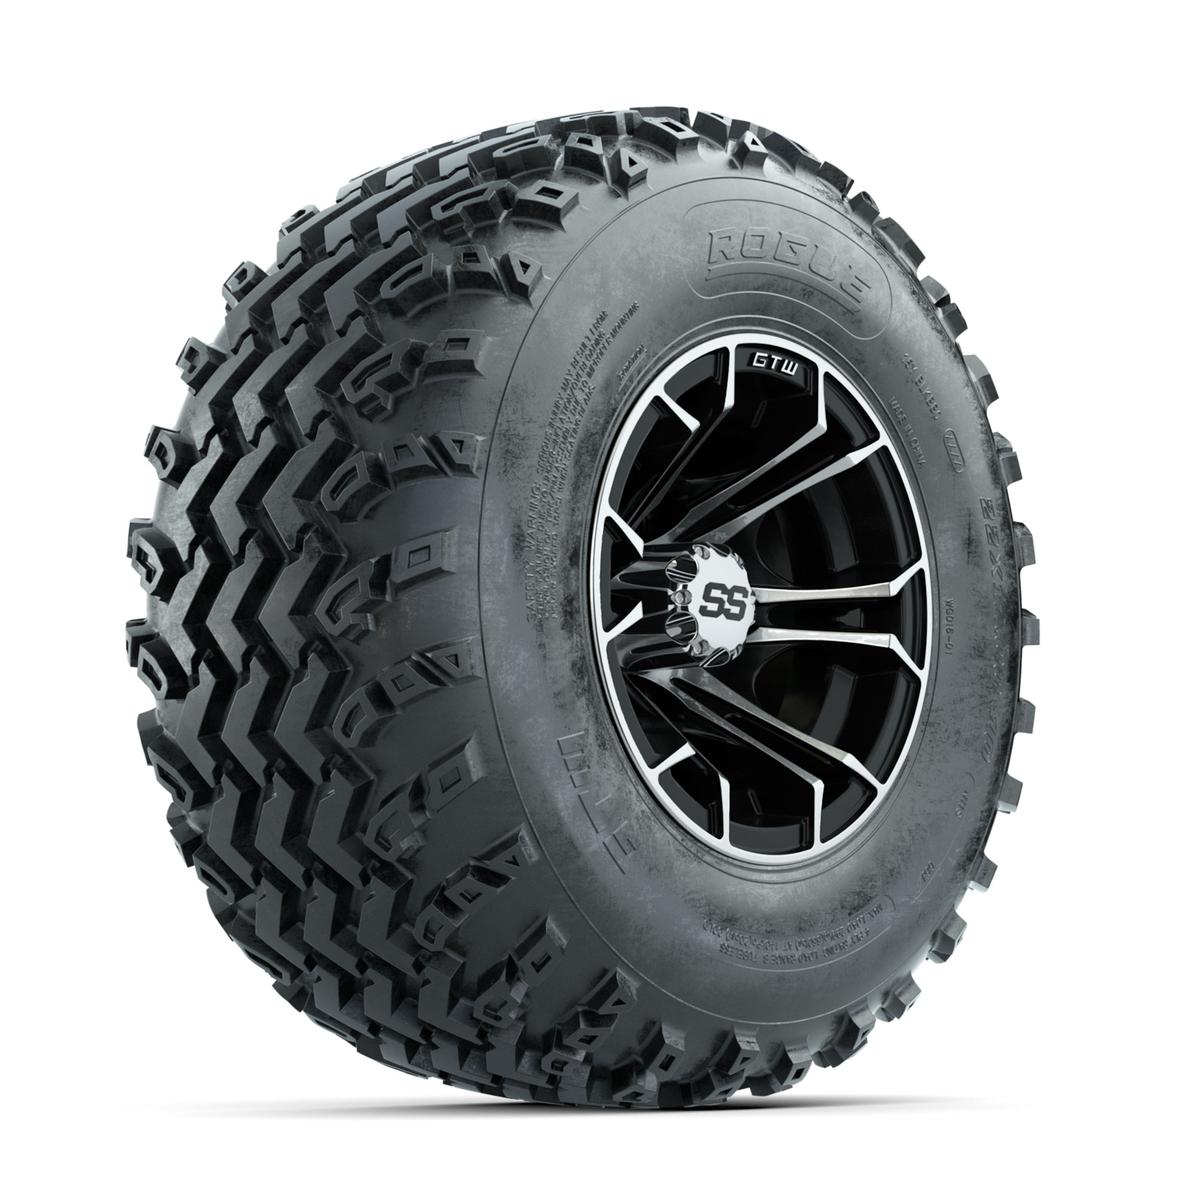 GTW Spyder Machined/Black 10 in Wheels with 22x11.00-10 Rogue All Terrain Tires �� Full Set